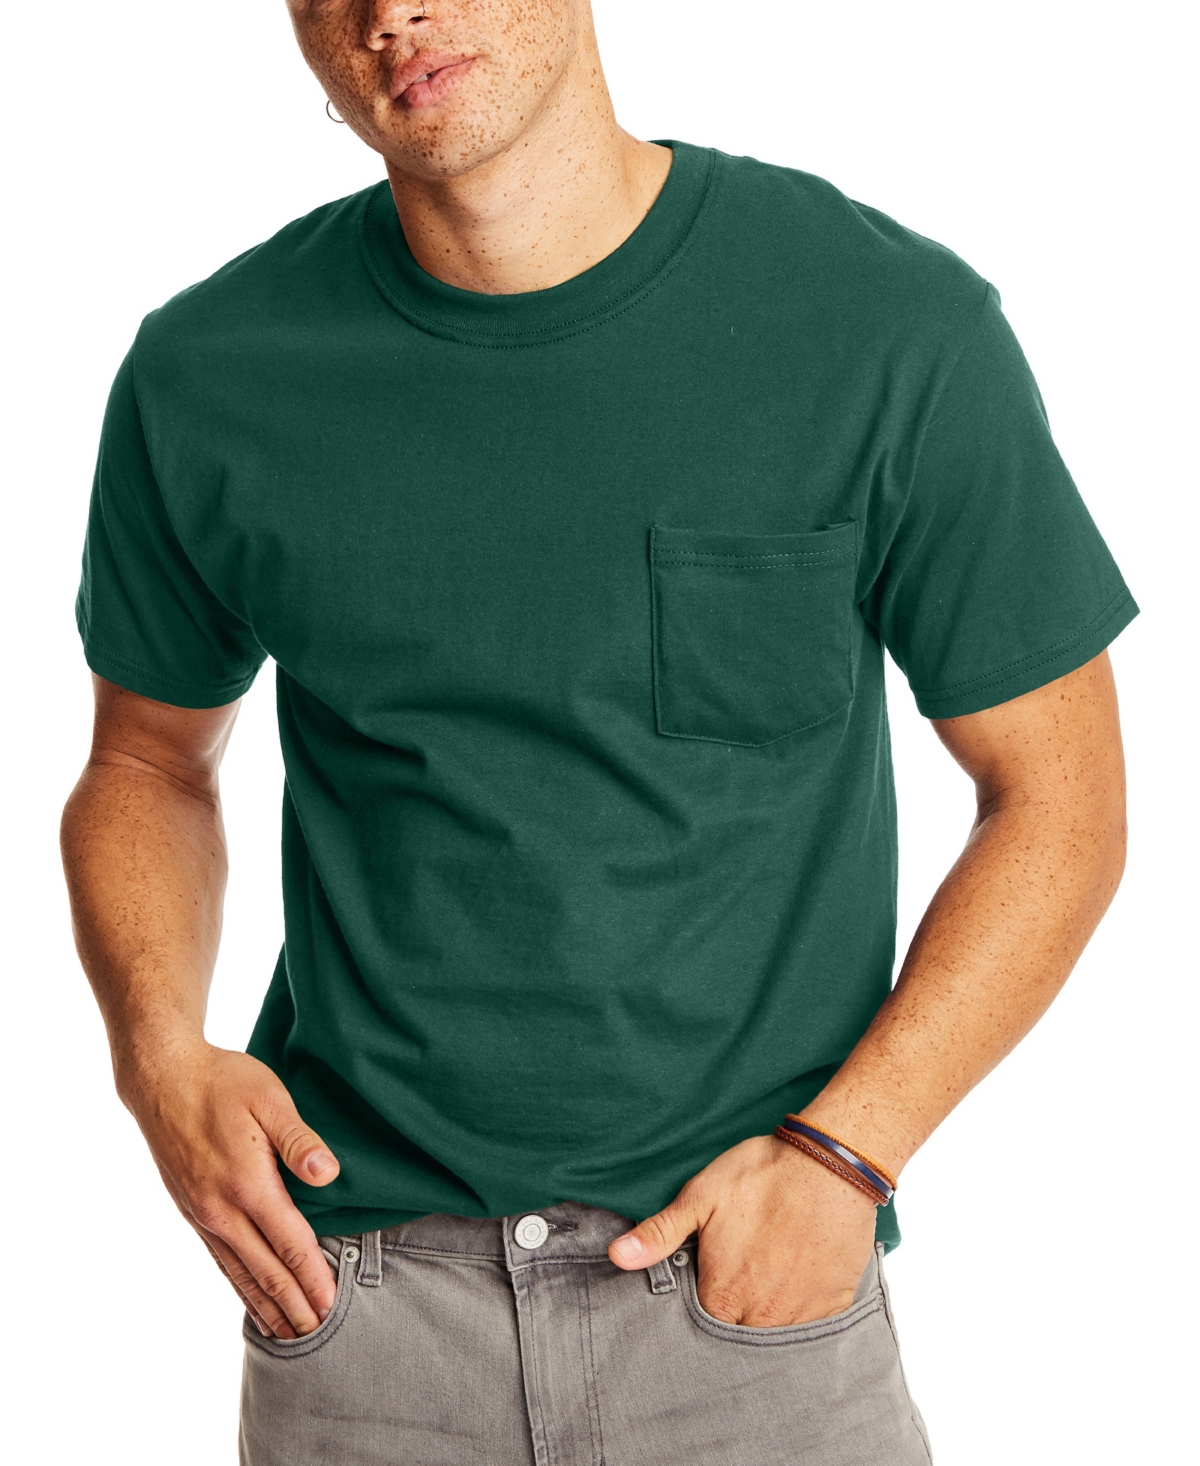 Hanes Beefy-t Unisex Pocket T-shirt, 2-pack In Green